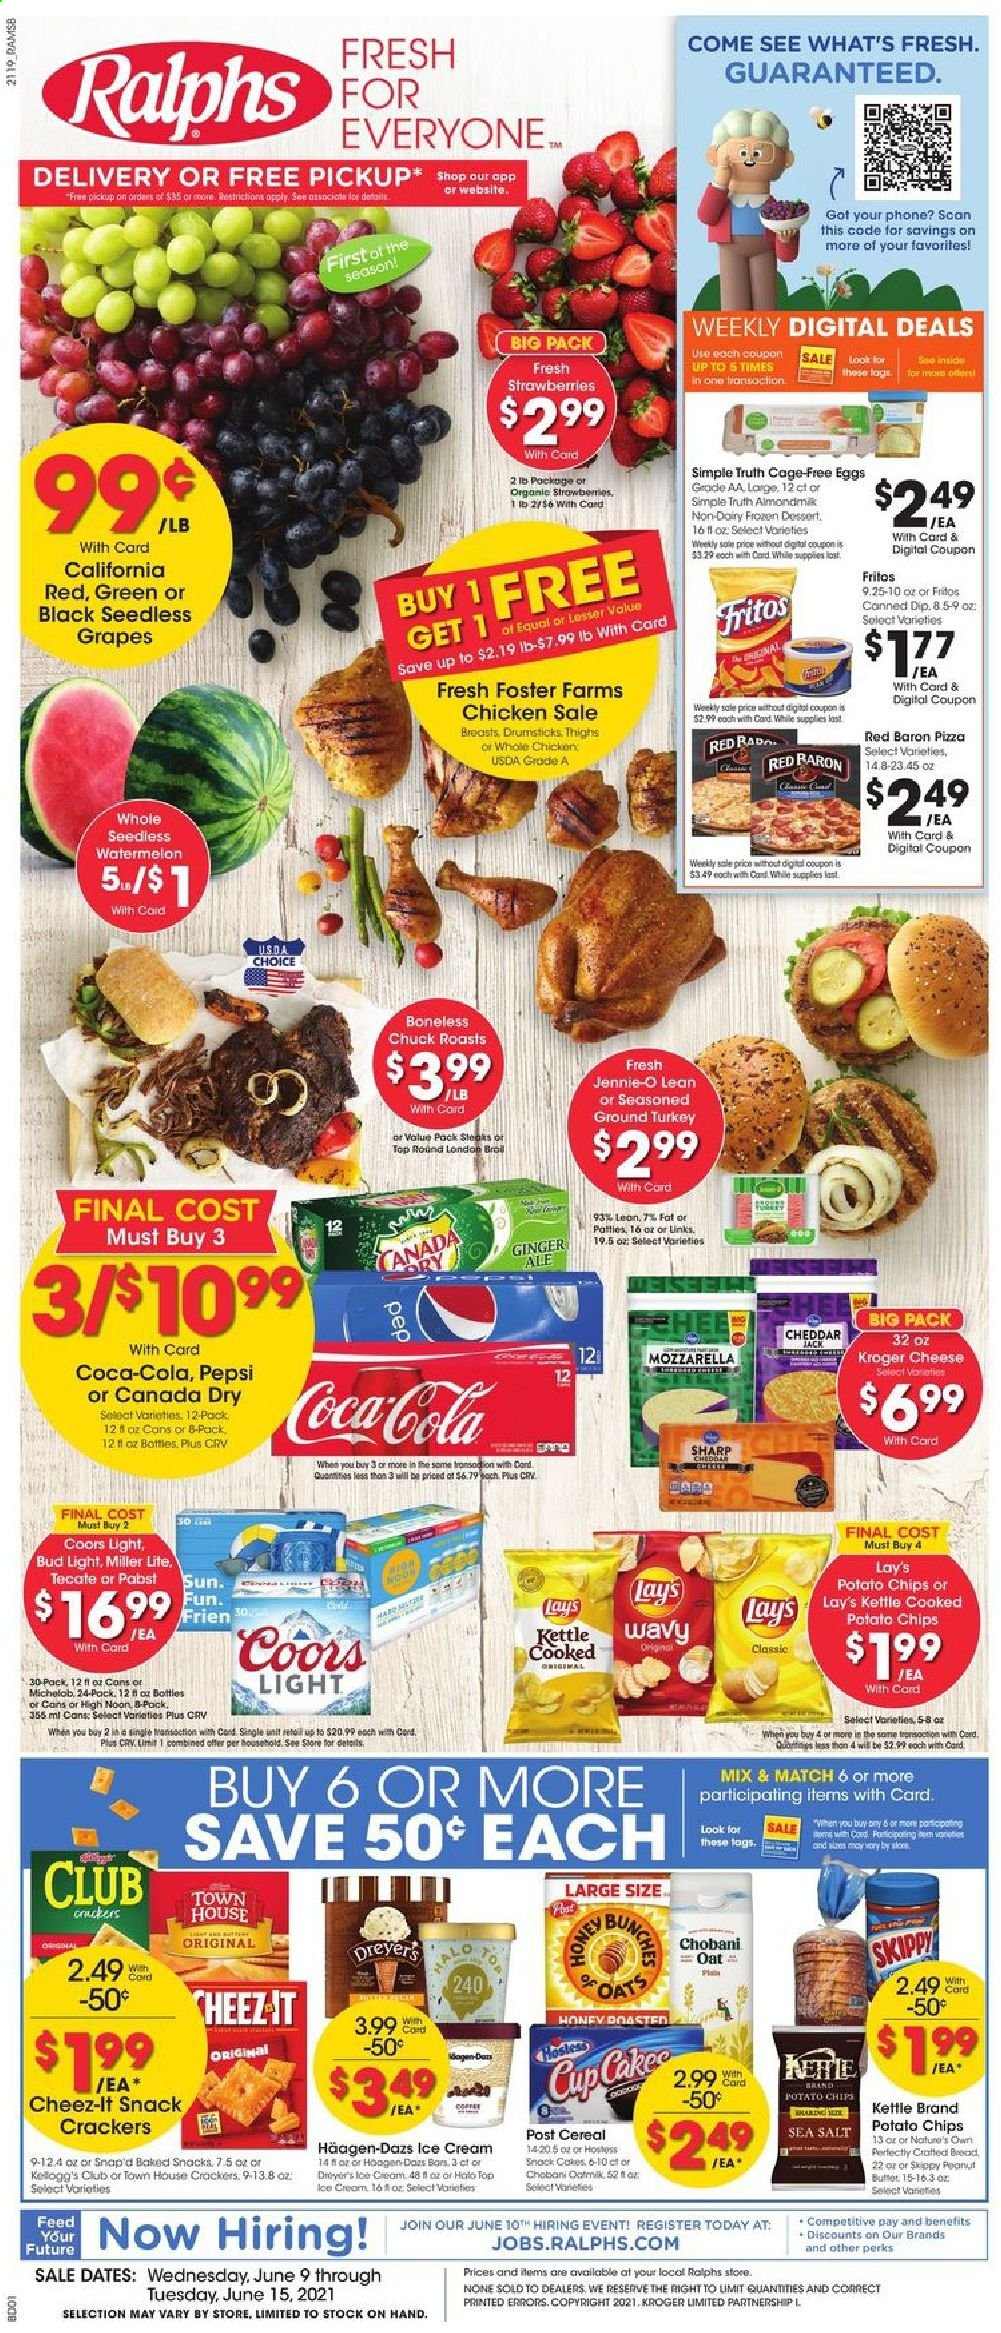 thumbnail - Ralphs Flyer - 06/09/2021 - 06/15/2021 - Sales products - seedless grapes, bread, grapes, strawberries, watermelon, cod, mozzarella, cheese, Chobani, eggs, cage free eggs, dip, Häagen-Dazs, Red Baron, snack, crackers, Fritos, potato chips, Lay’s, Cheez-It, oats, cereals, peanut butter, Canada Dry, Coca-Cola, ginger ale, Pepsi, beer, Miller Lite, Coors, Bud Light, ground turkey, whole chicken, bunches. Page 1.